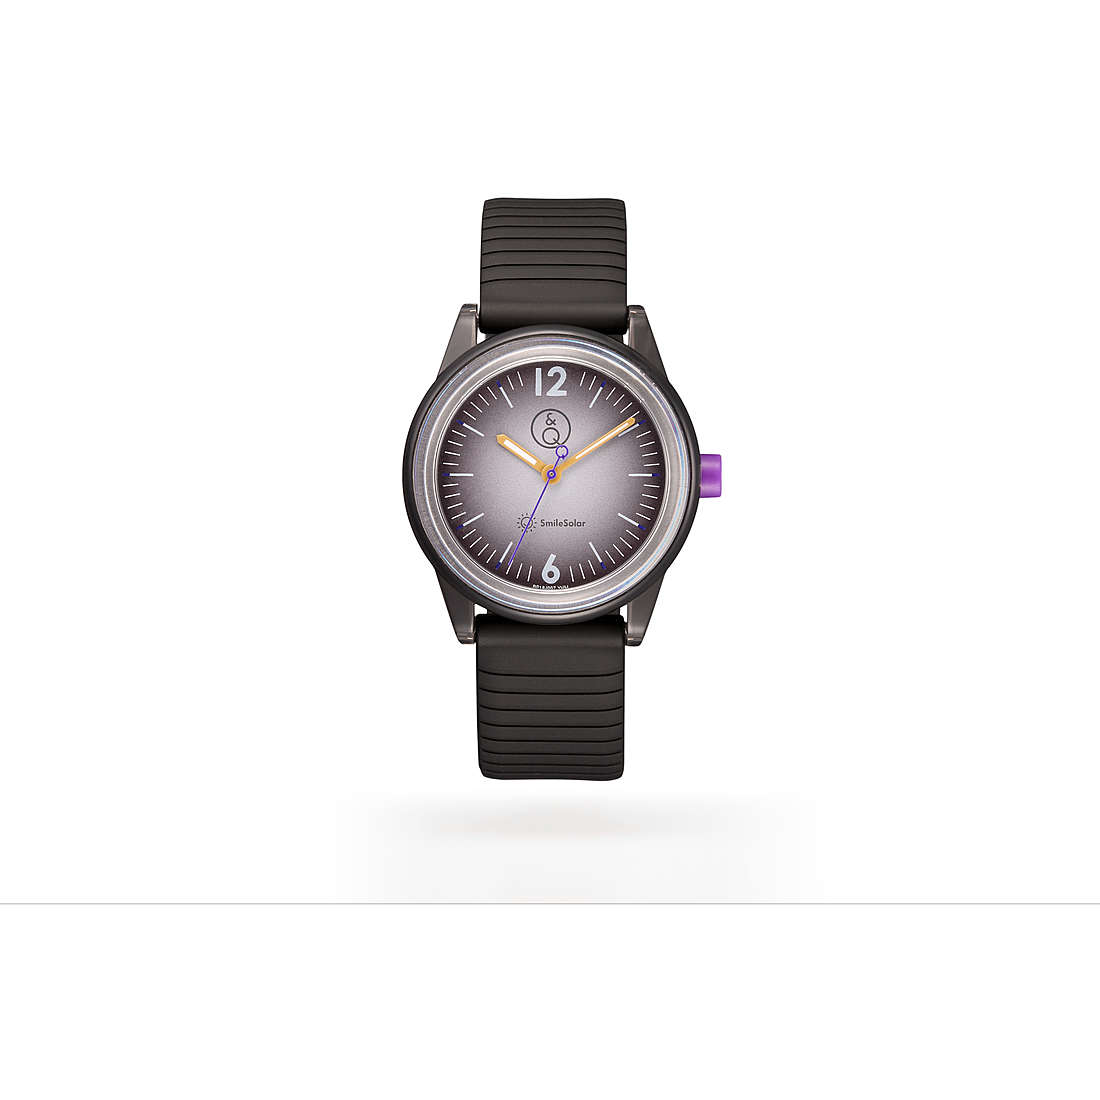 Smile Solar Music Festival Women's Time-Only Watch